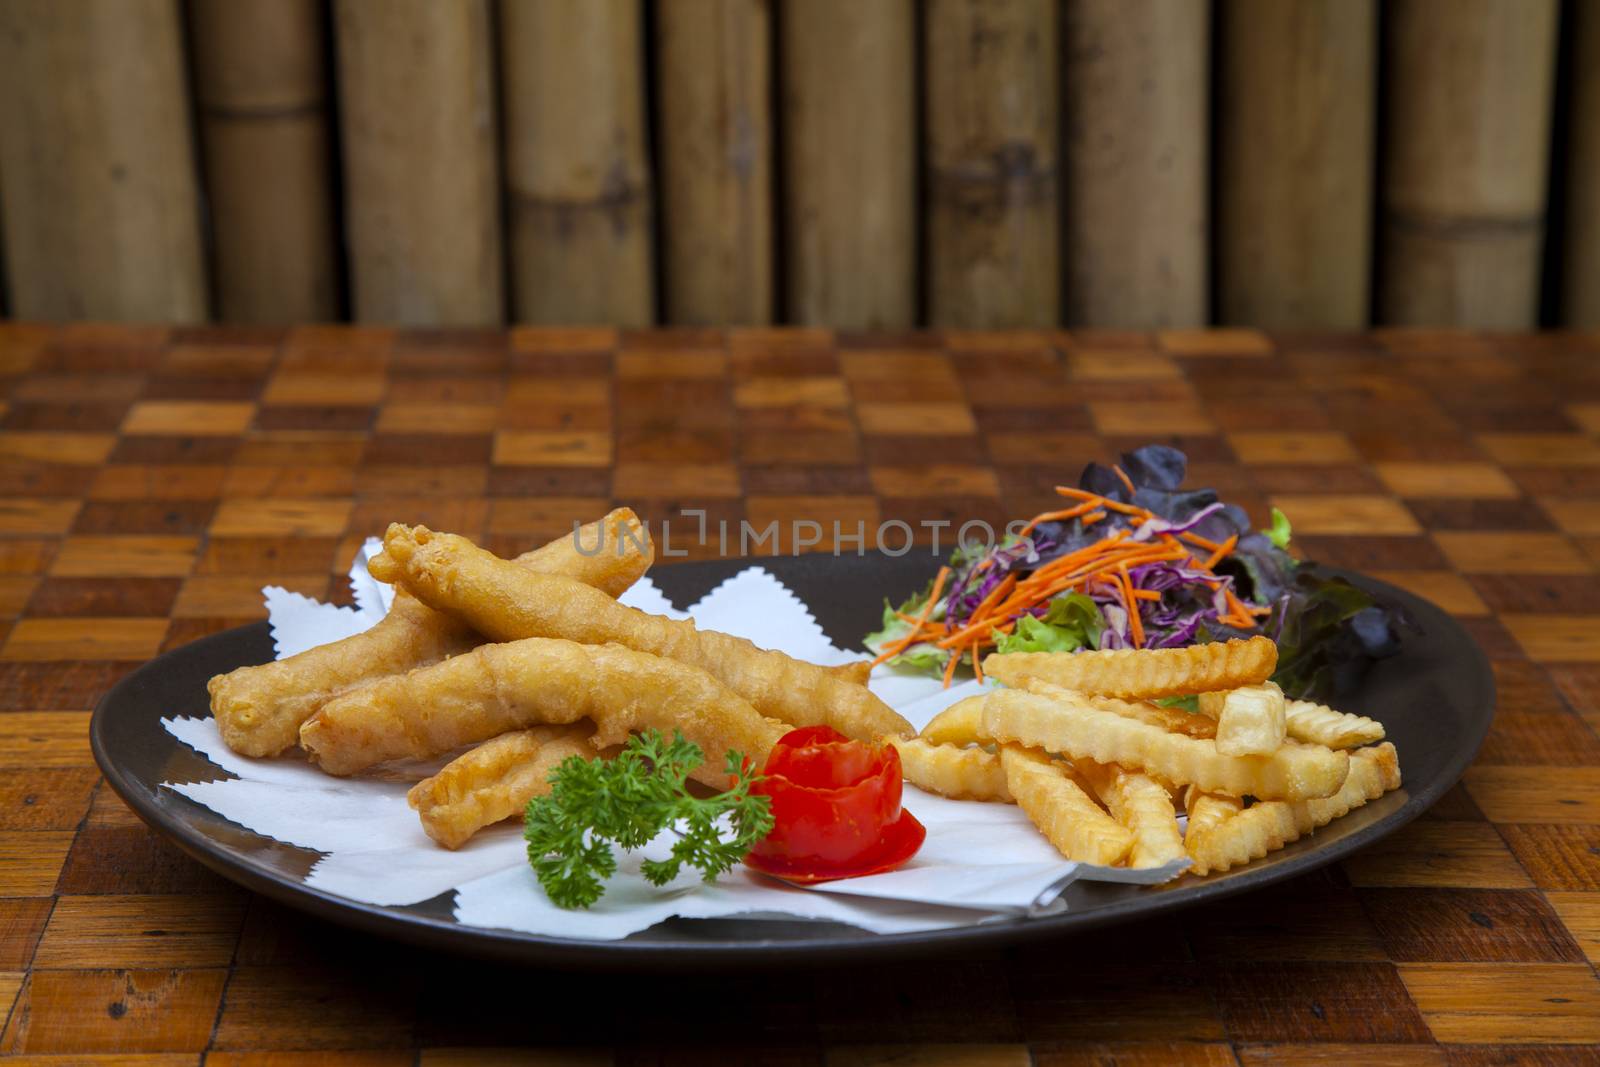  Mahi fish and chips with French fries  by jee1999